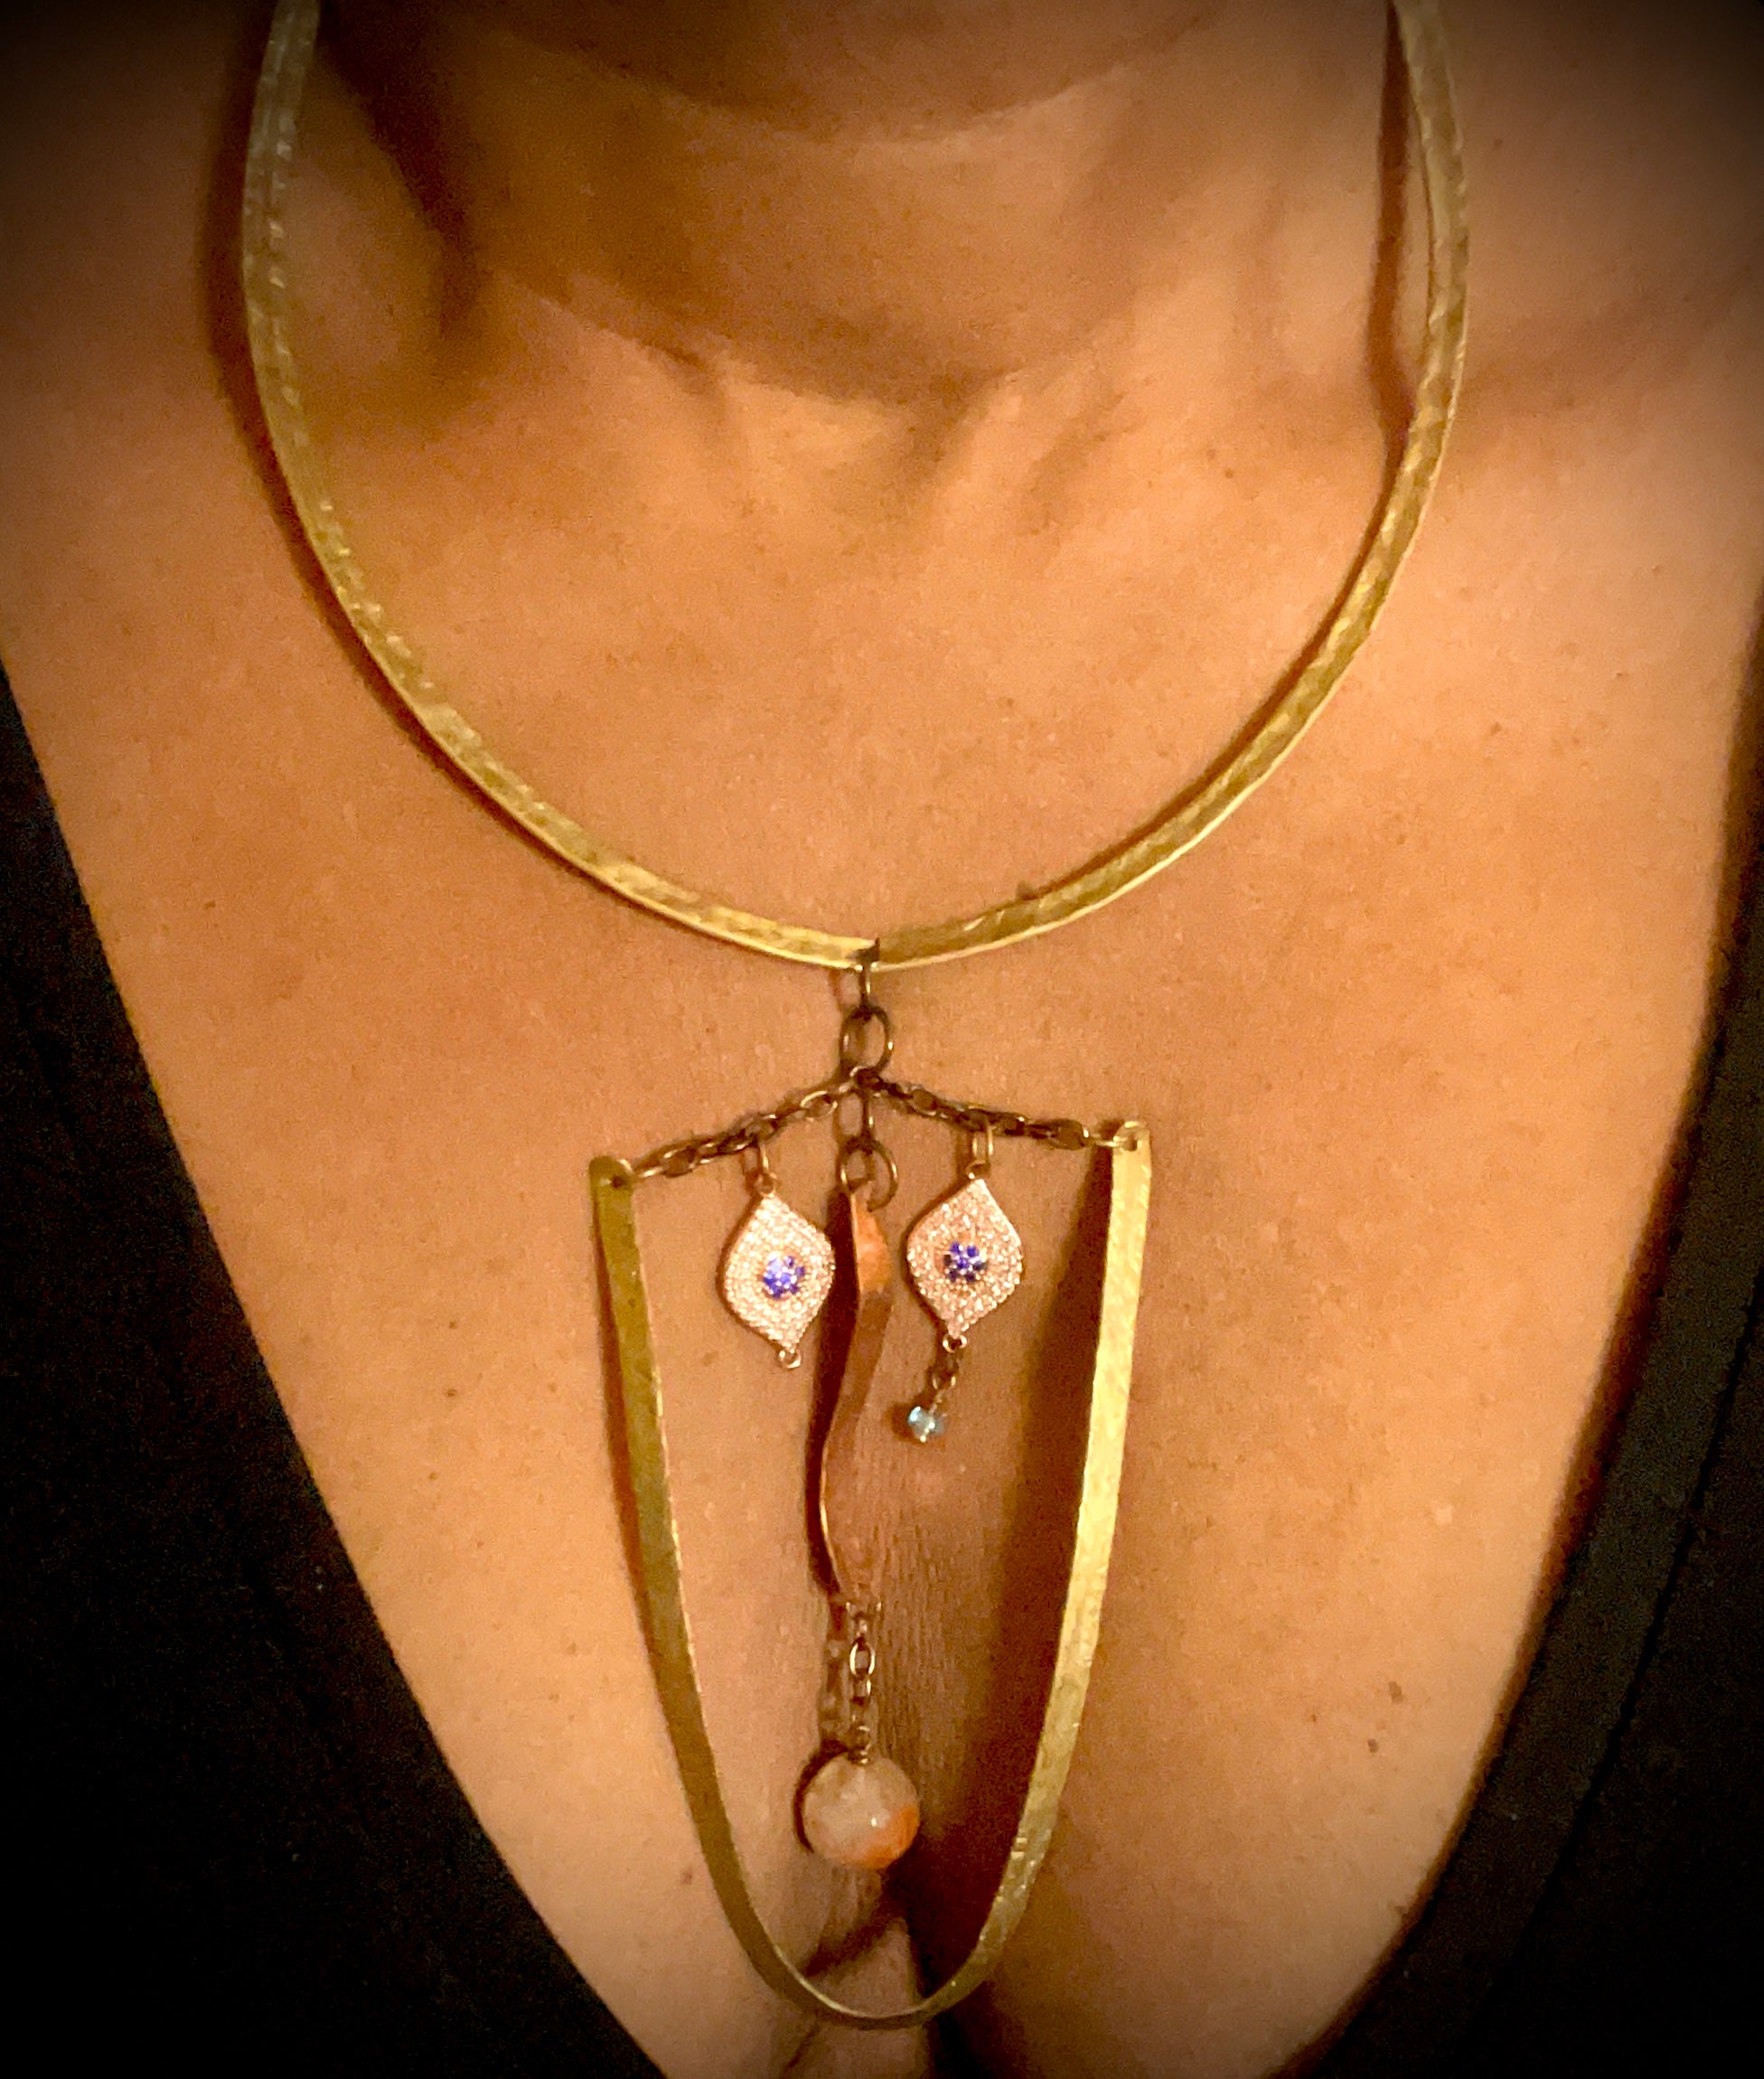 Close up of a woman’s neck and cleavage area shown wearing a brass collar necklace with elongated face made of hammered brass, eyes made of evil eye charms, nose made of hammered, curved copper suspended in middle from a length of chain. Copper has a round agate bead hanging to make the mouth.